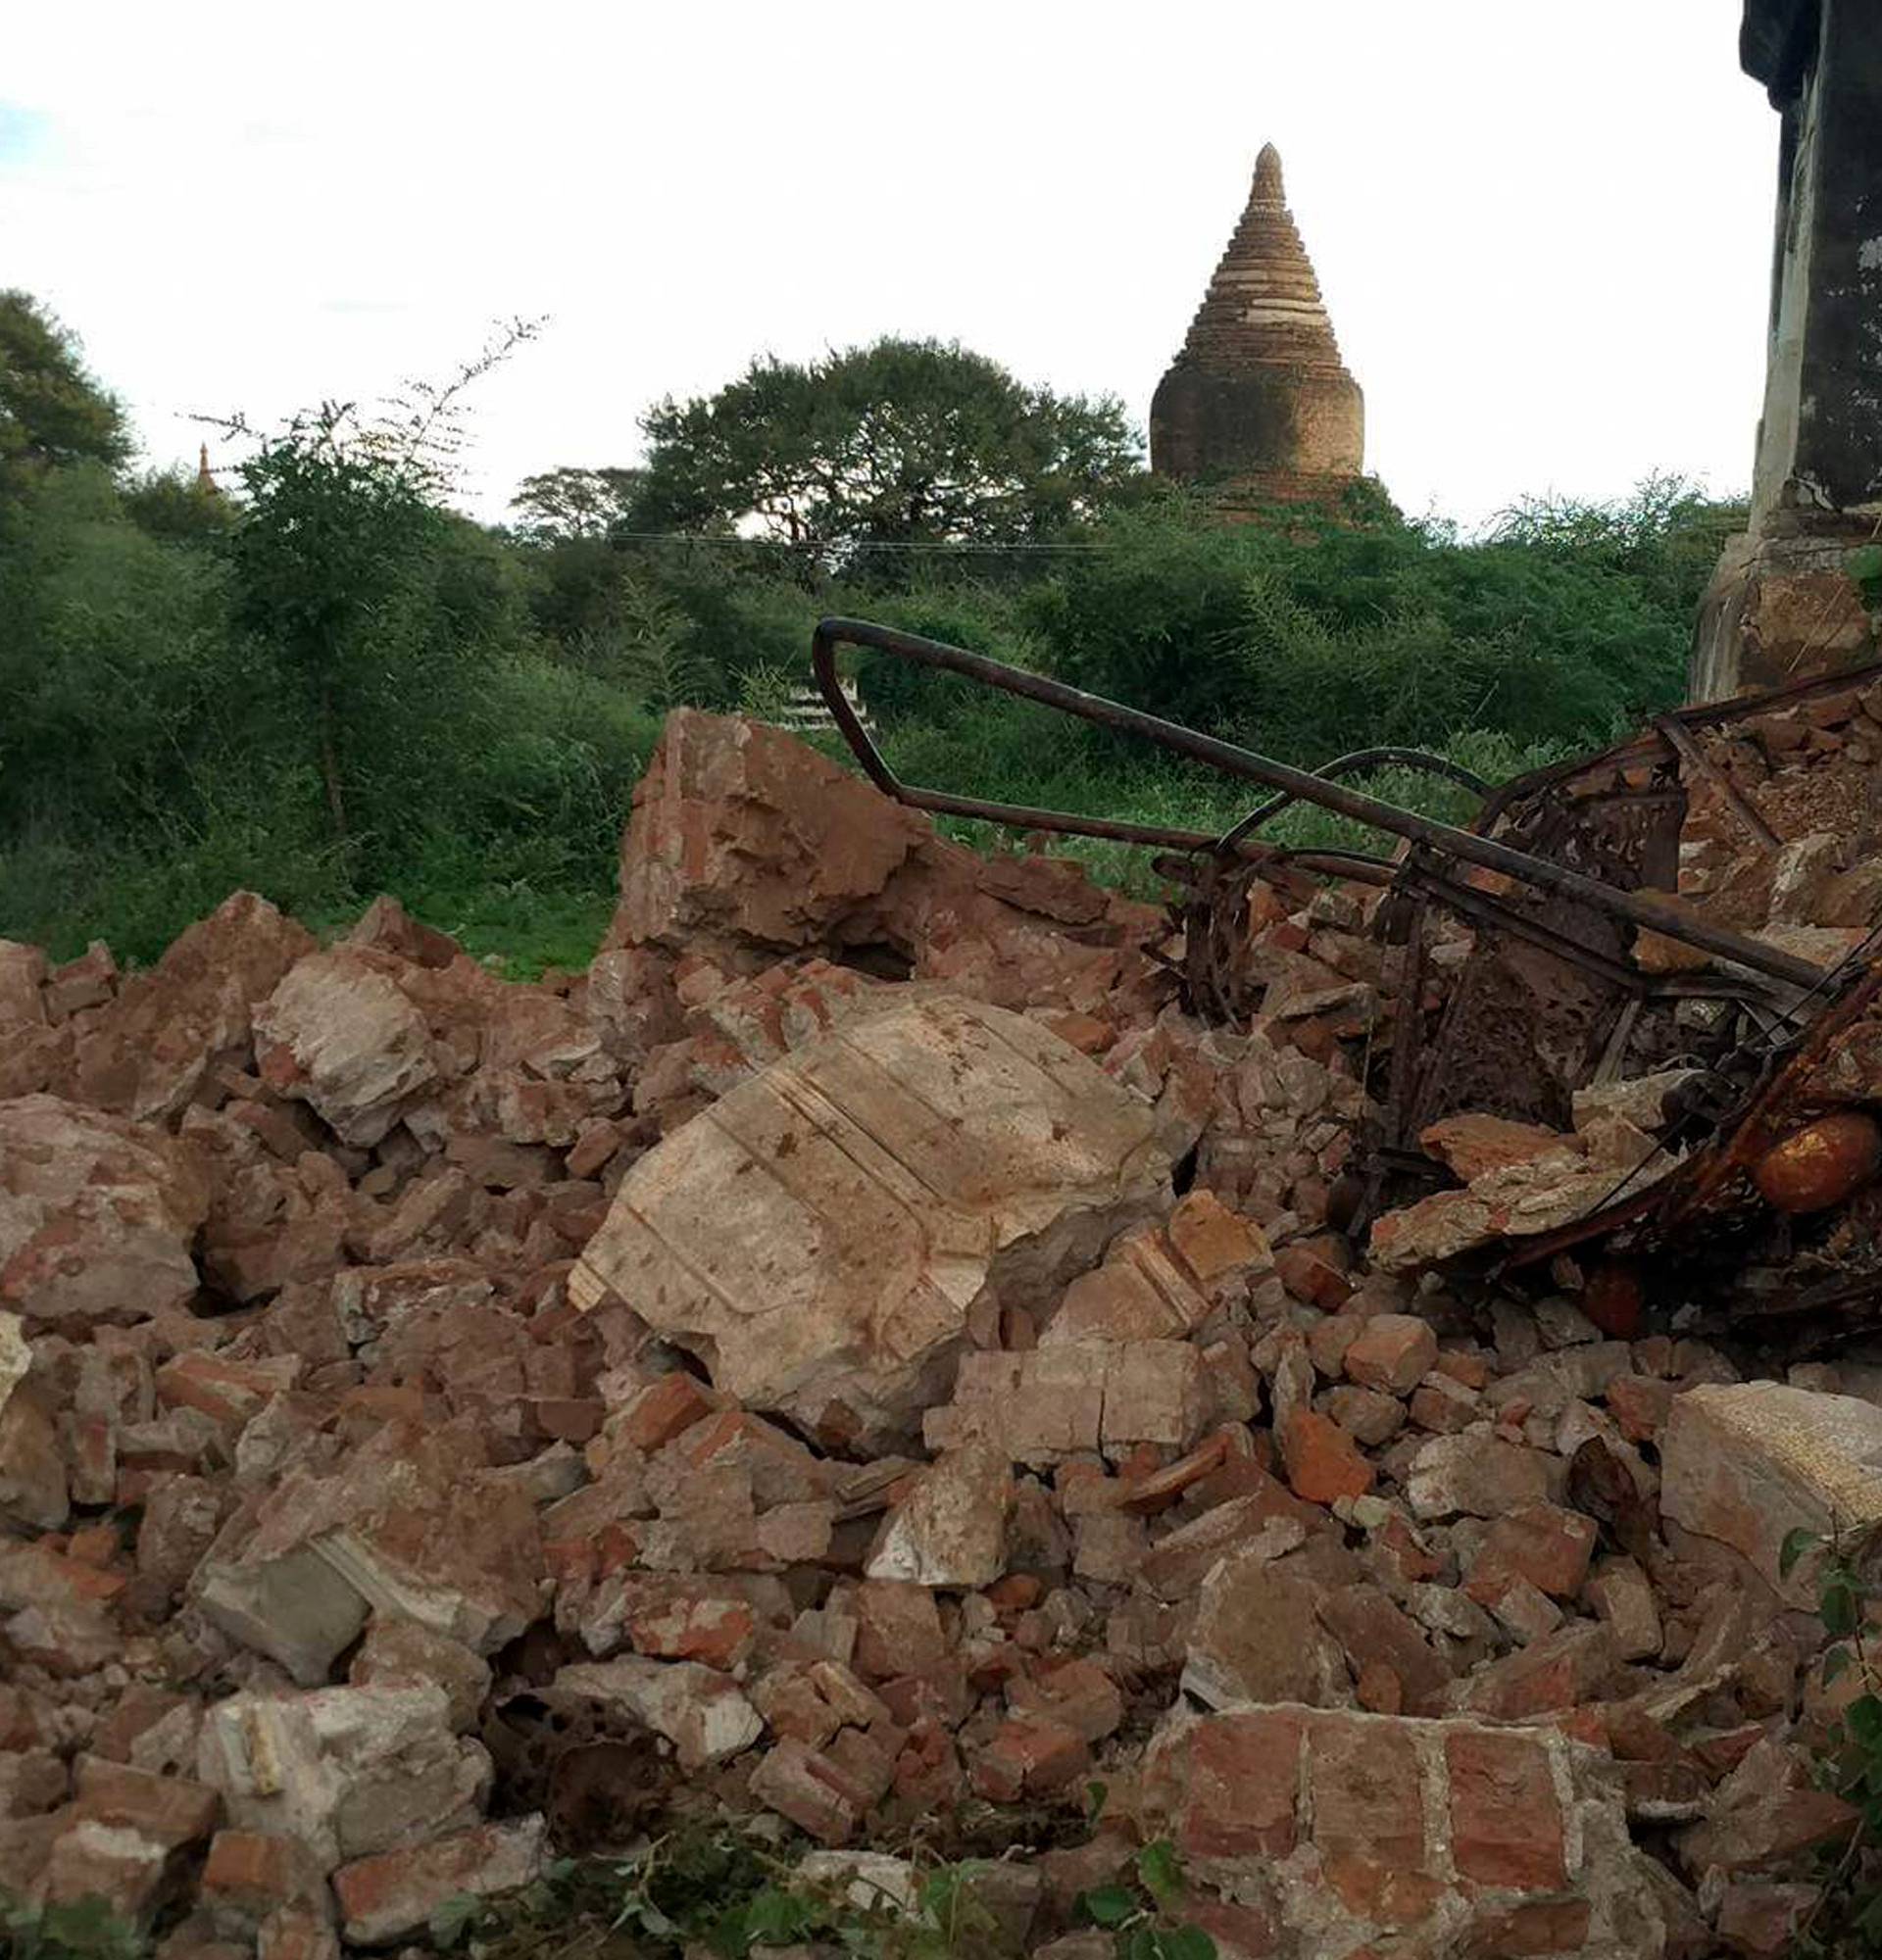 Rubble is seen after an earthquake in Bagan